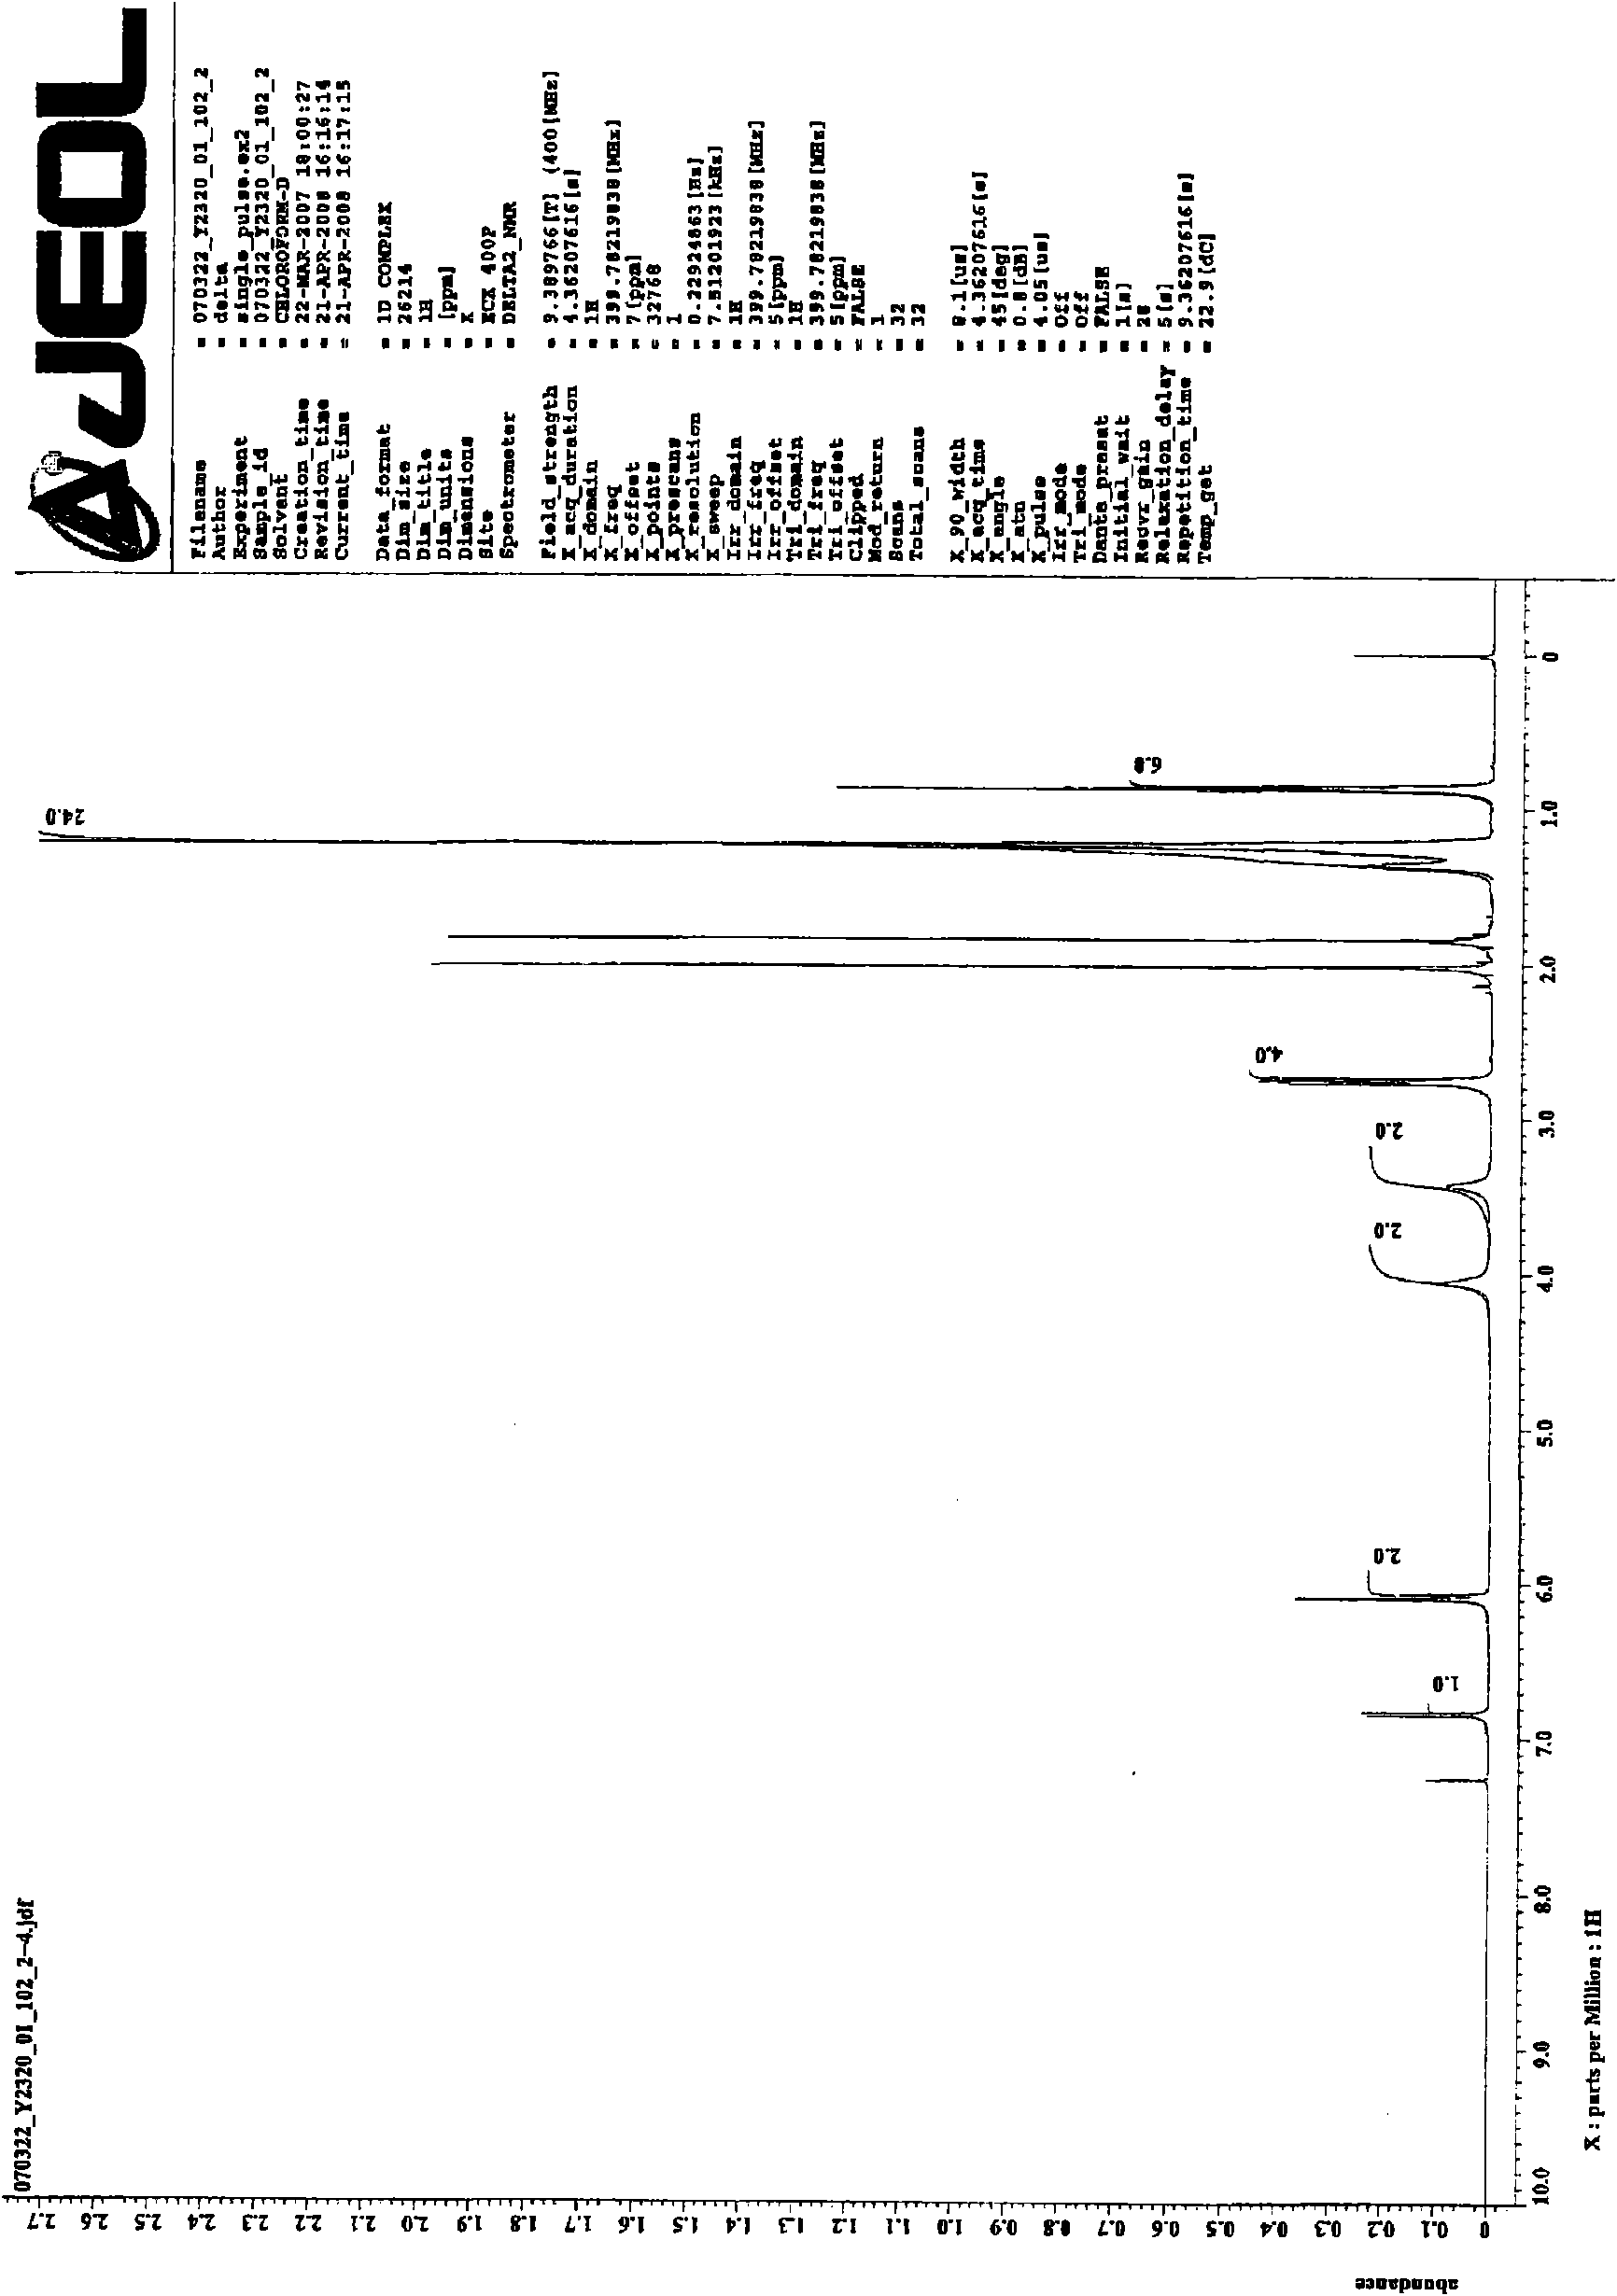 Liquid crystal orientation agent, liquid crystal display element, poly-amic acid, polyimide and compound